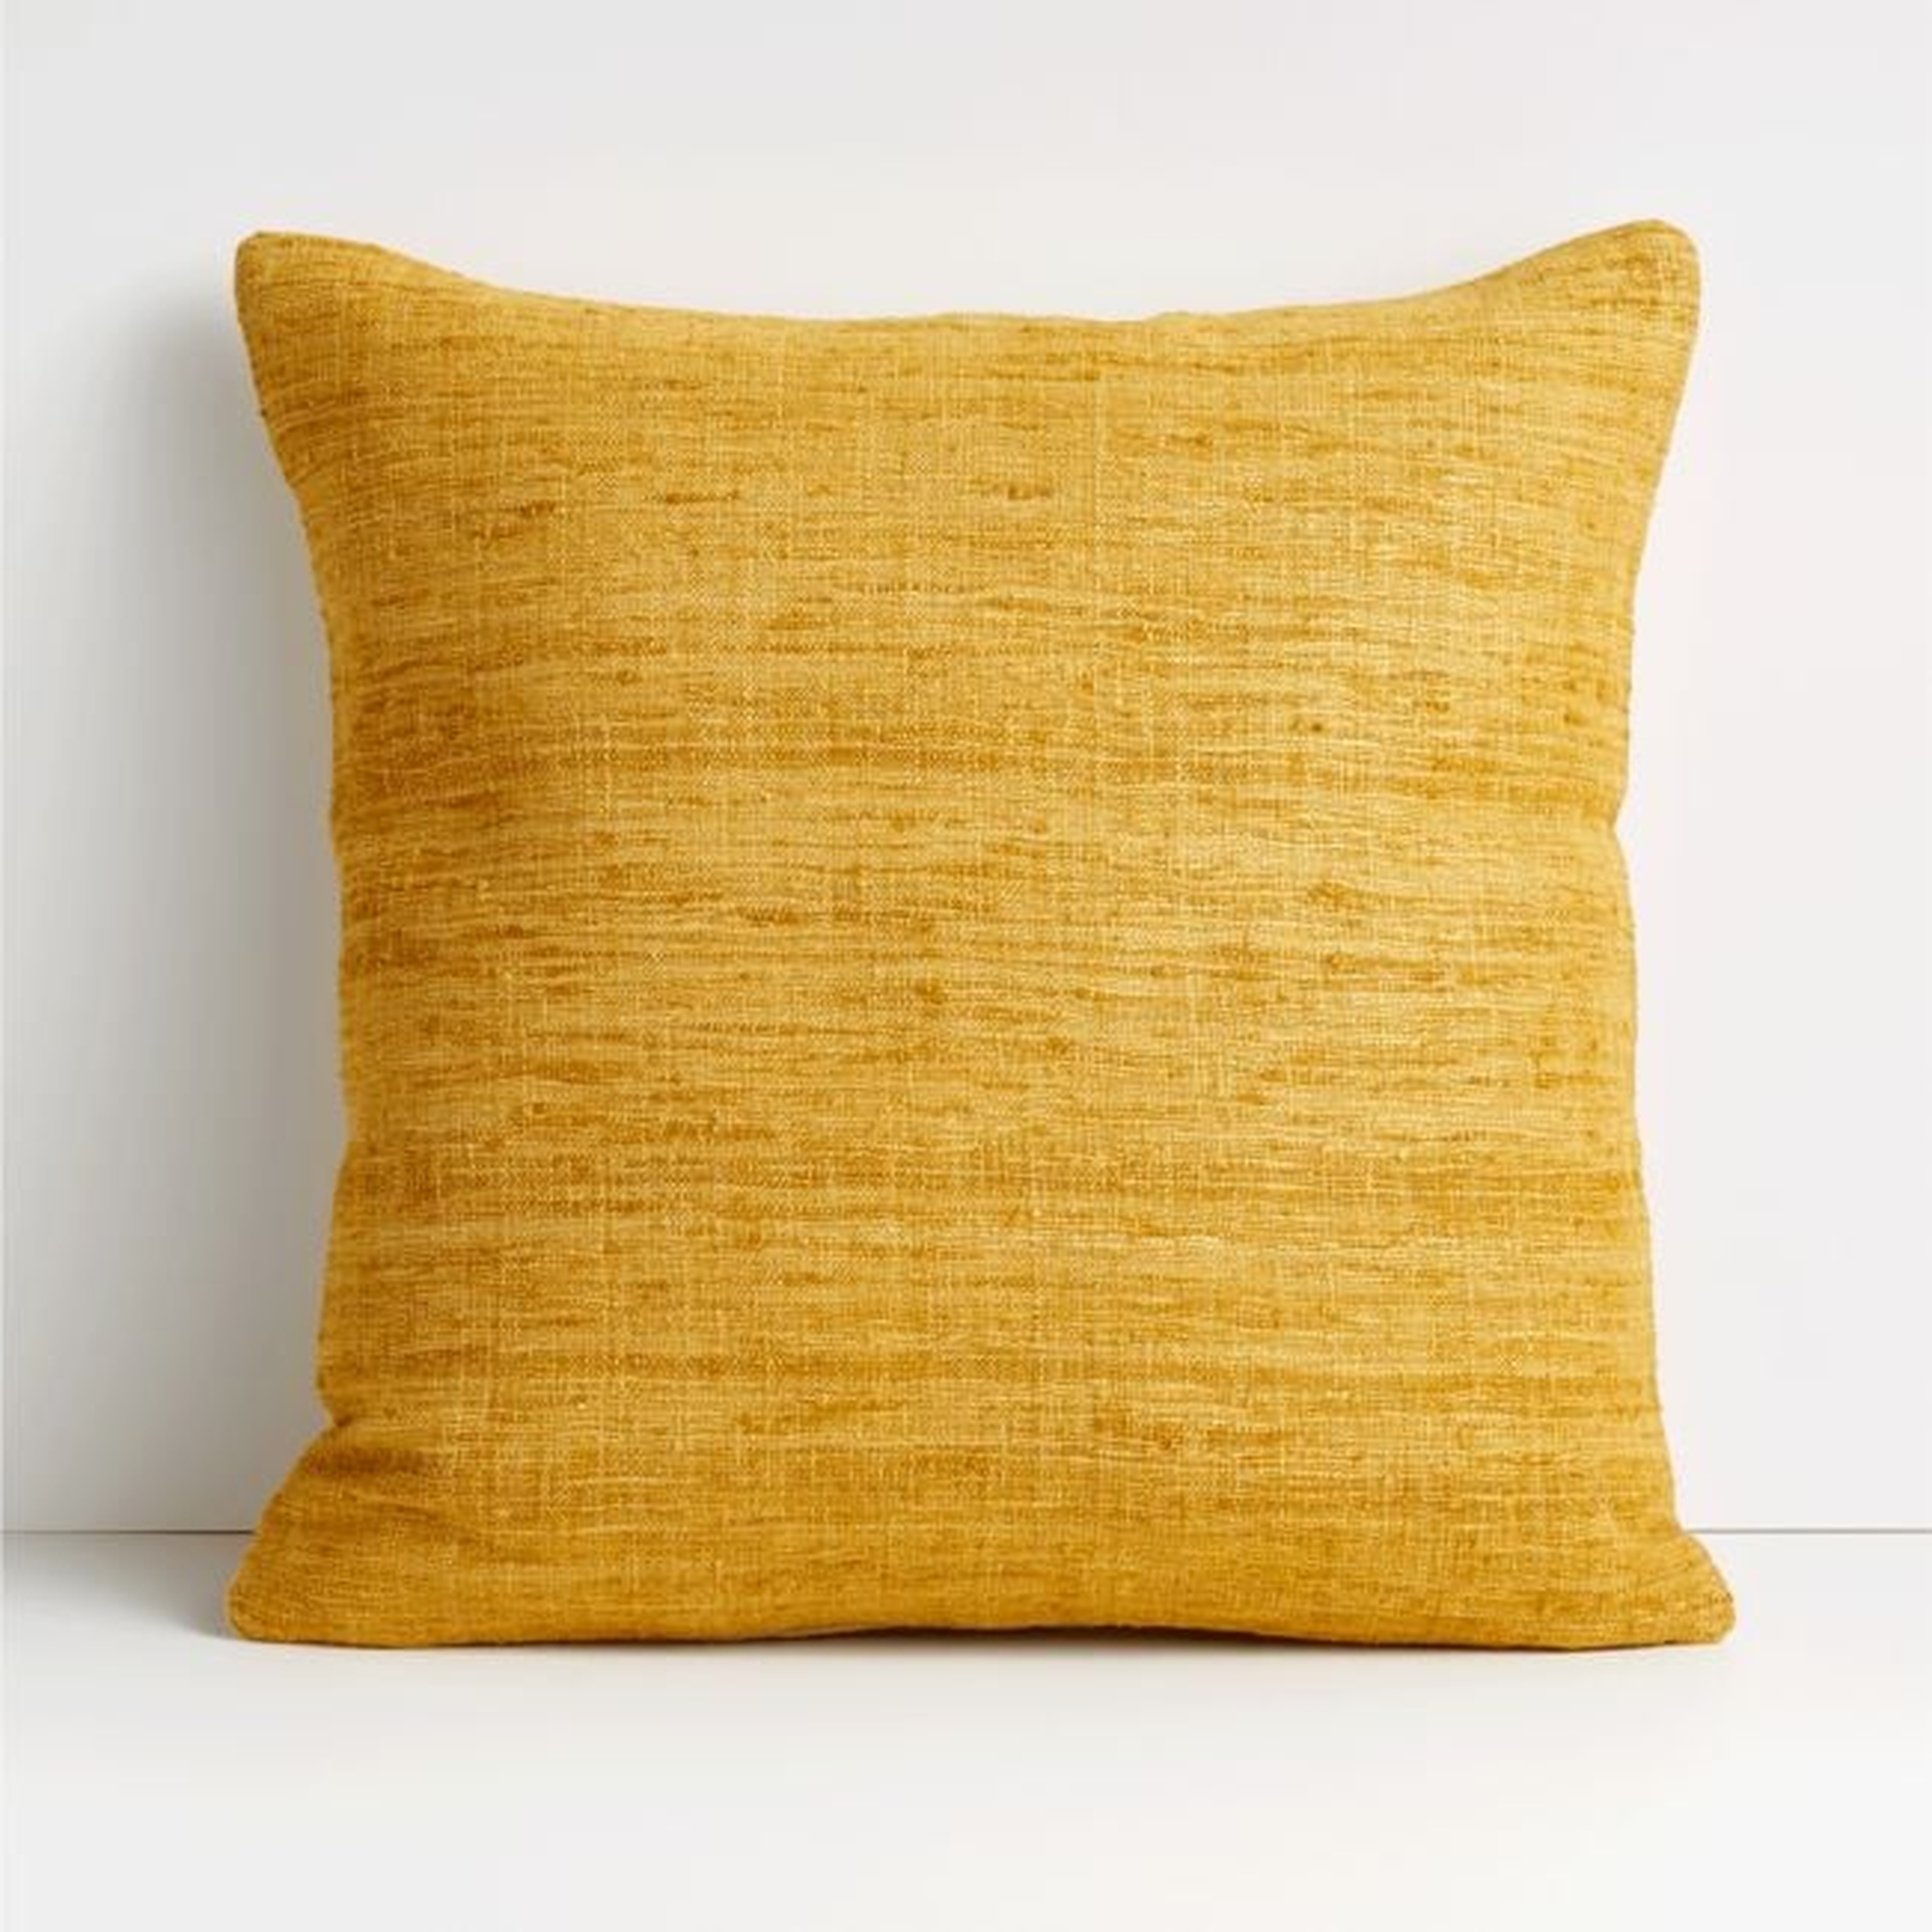 Trevino 20" Yellow Pillow Cover - Crate and Barrel